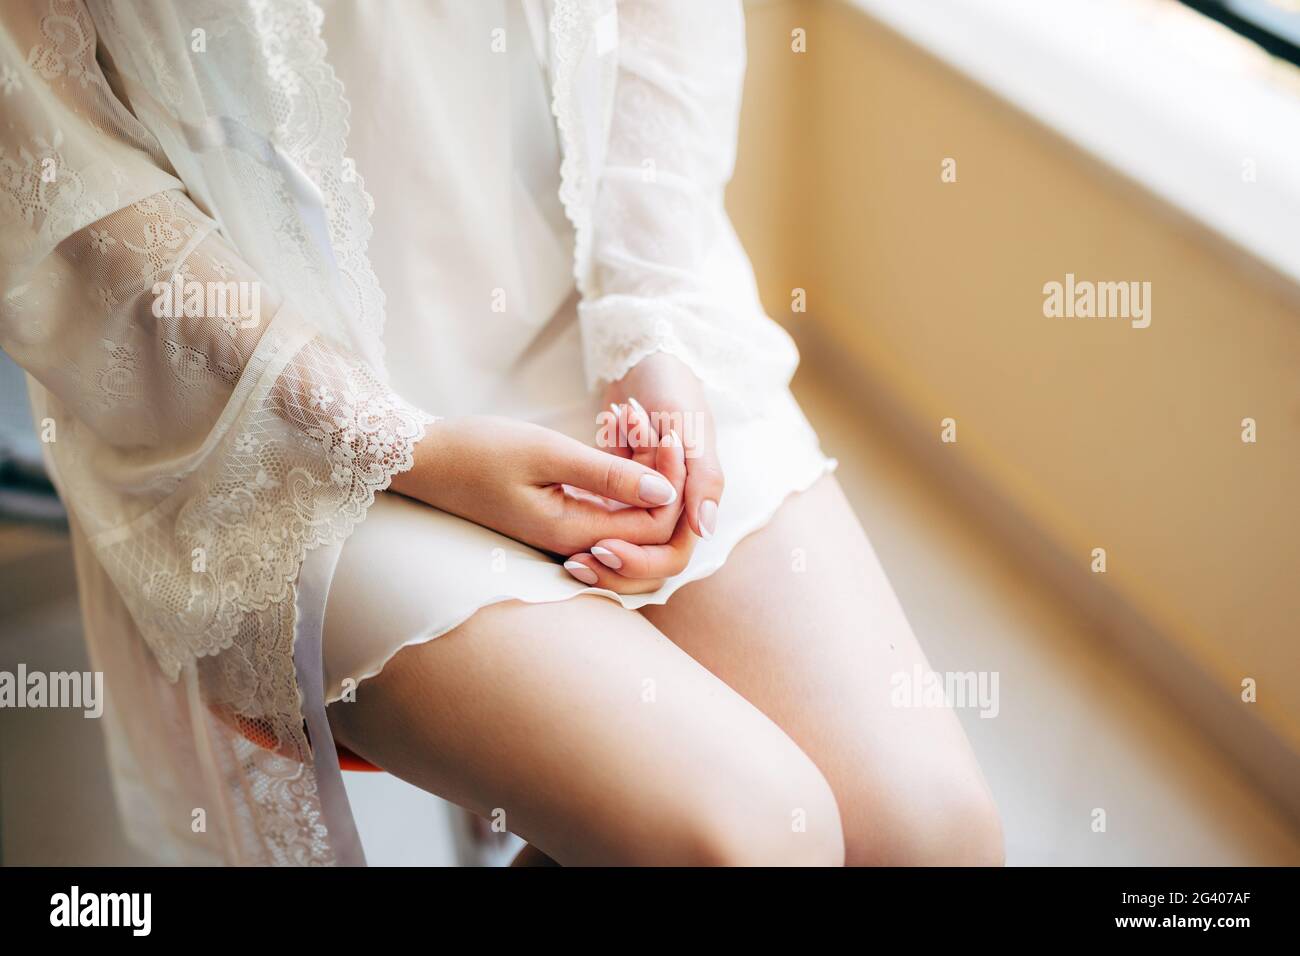 Young girl in peignoir put her hands on her knees Stock Photo